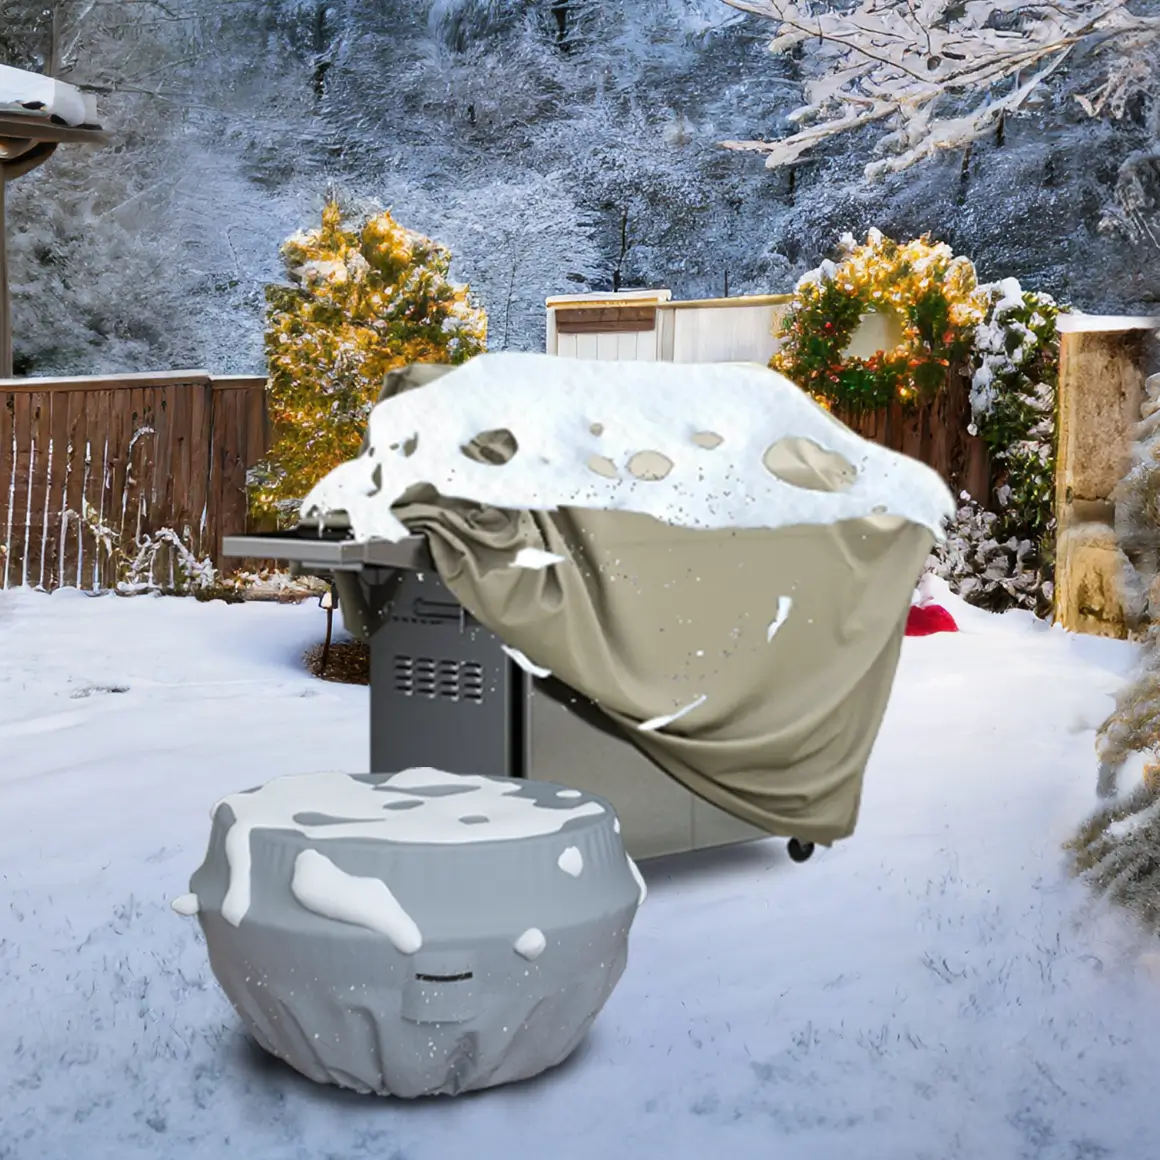 Grill and Chill - Outdoor Cooking in Winter Wonderland